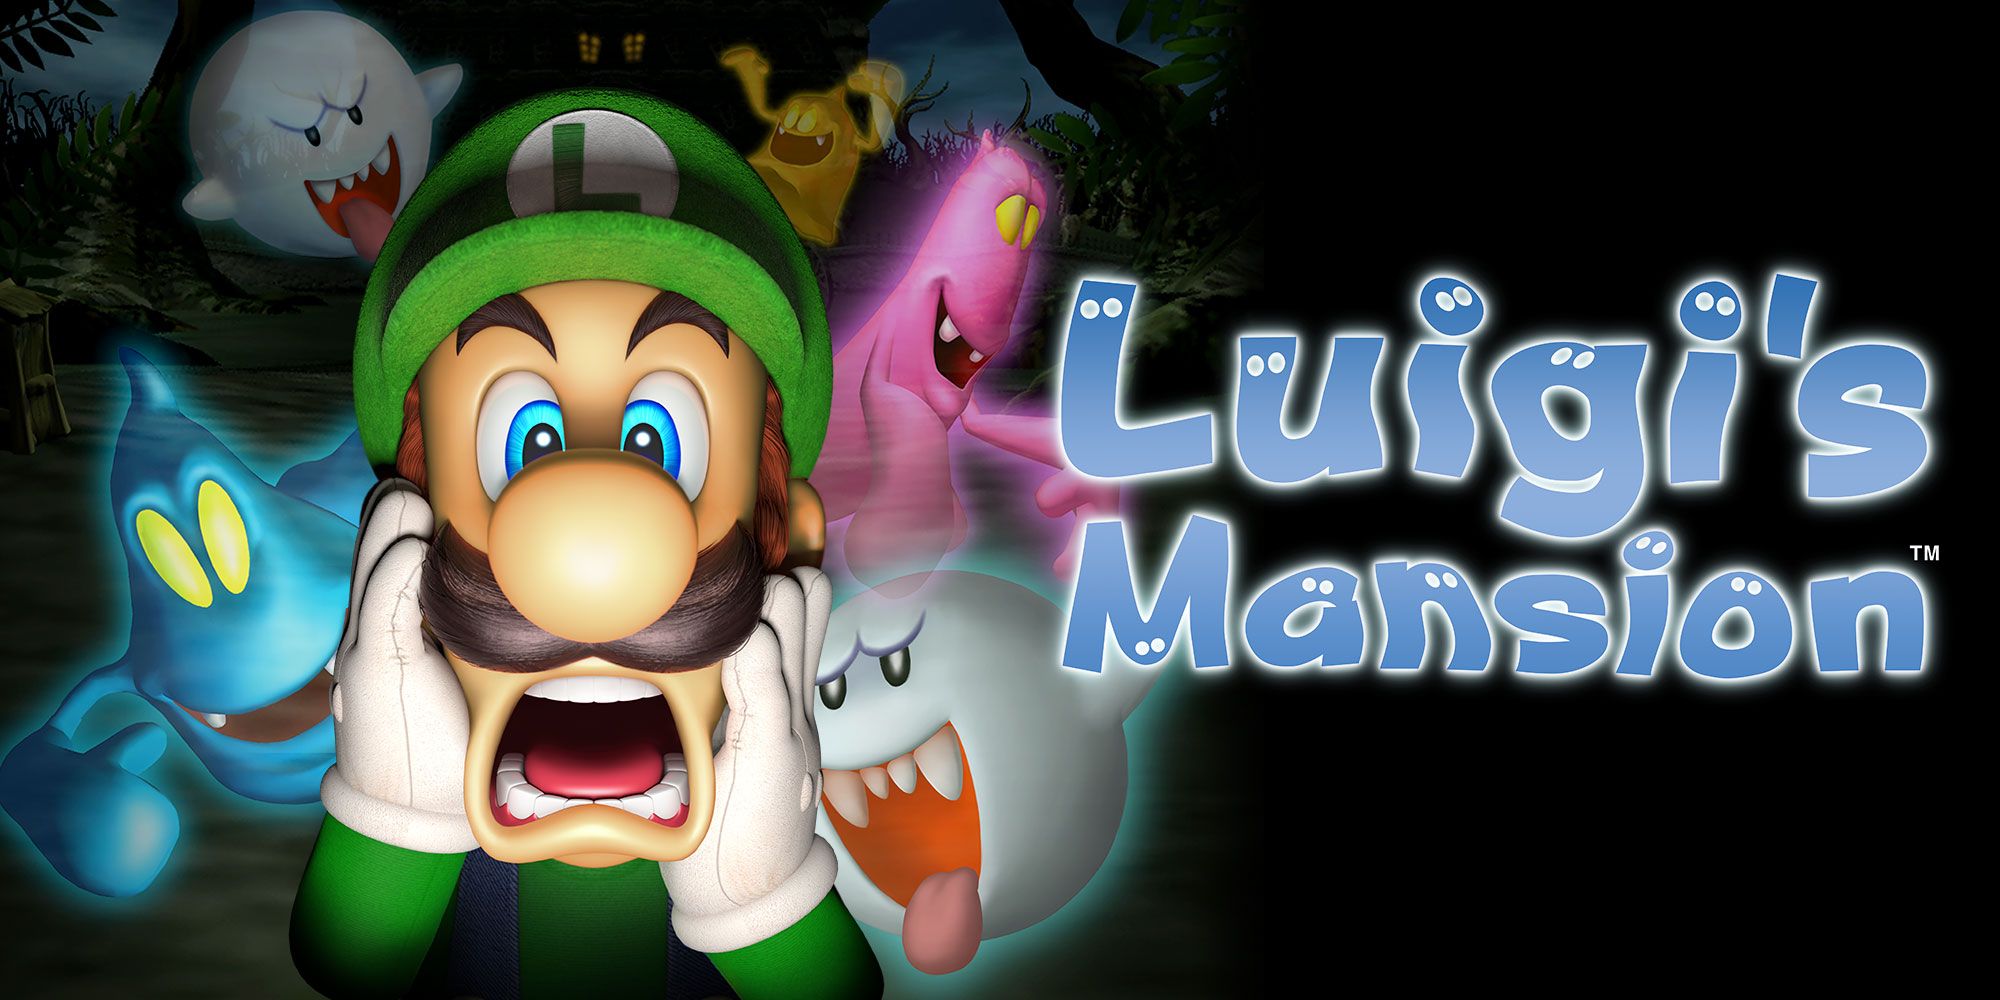 Luigi's Mansion GameCube - Luigi screams while surrounded by boos and other ghosts